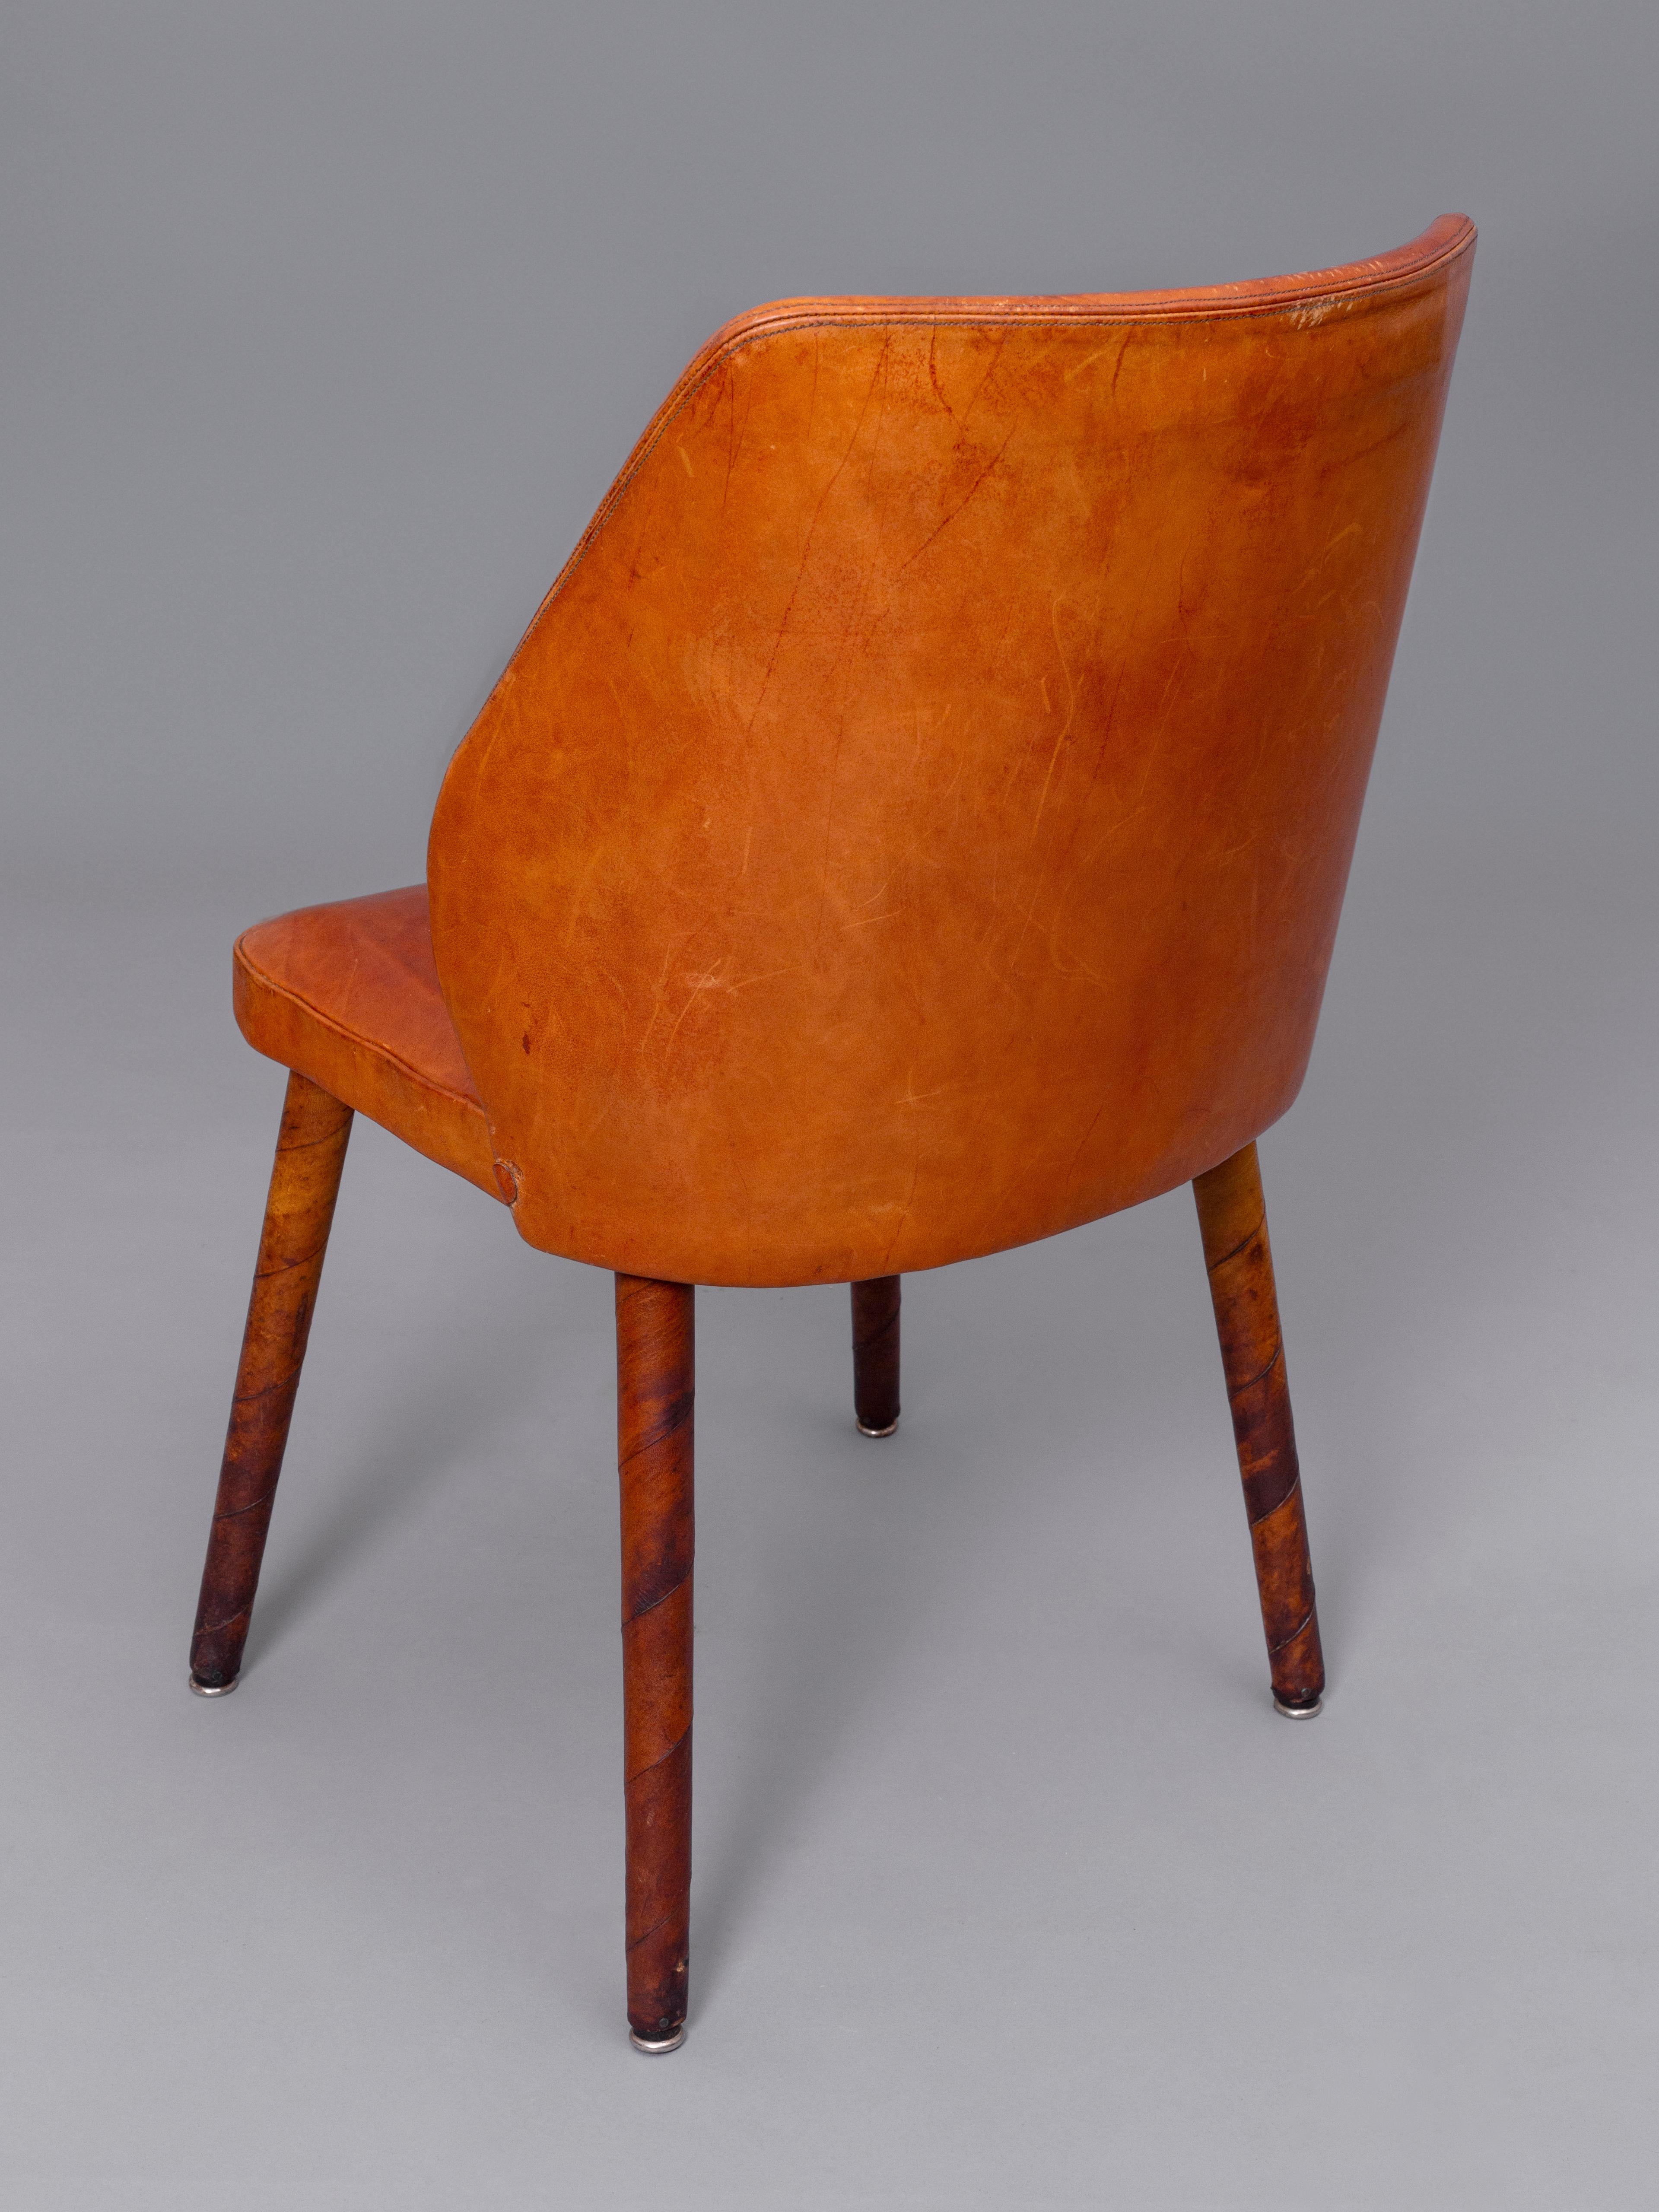 Mid-20th Century Mid-century Modern Danish Leather Chair, 1960s For Sale